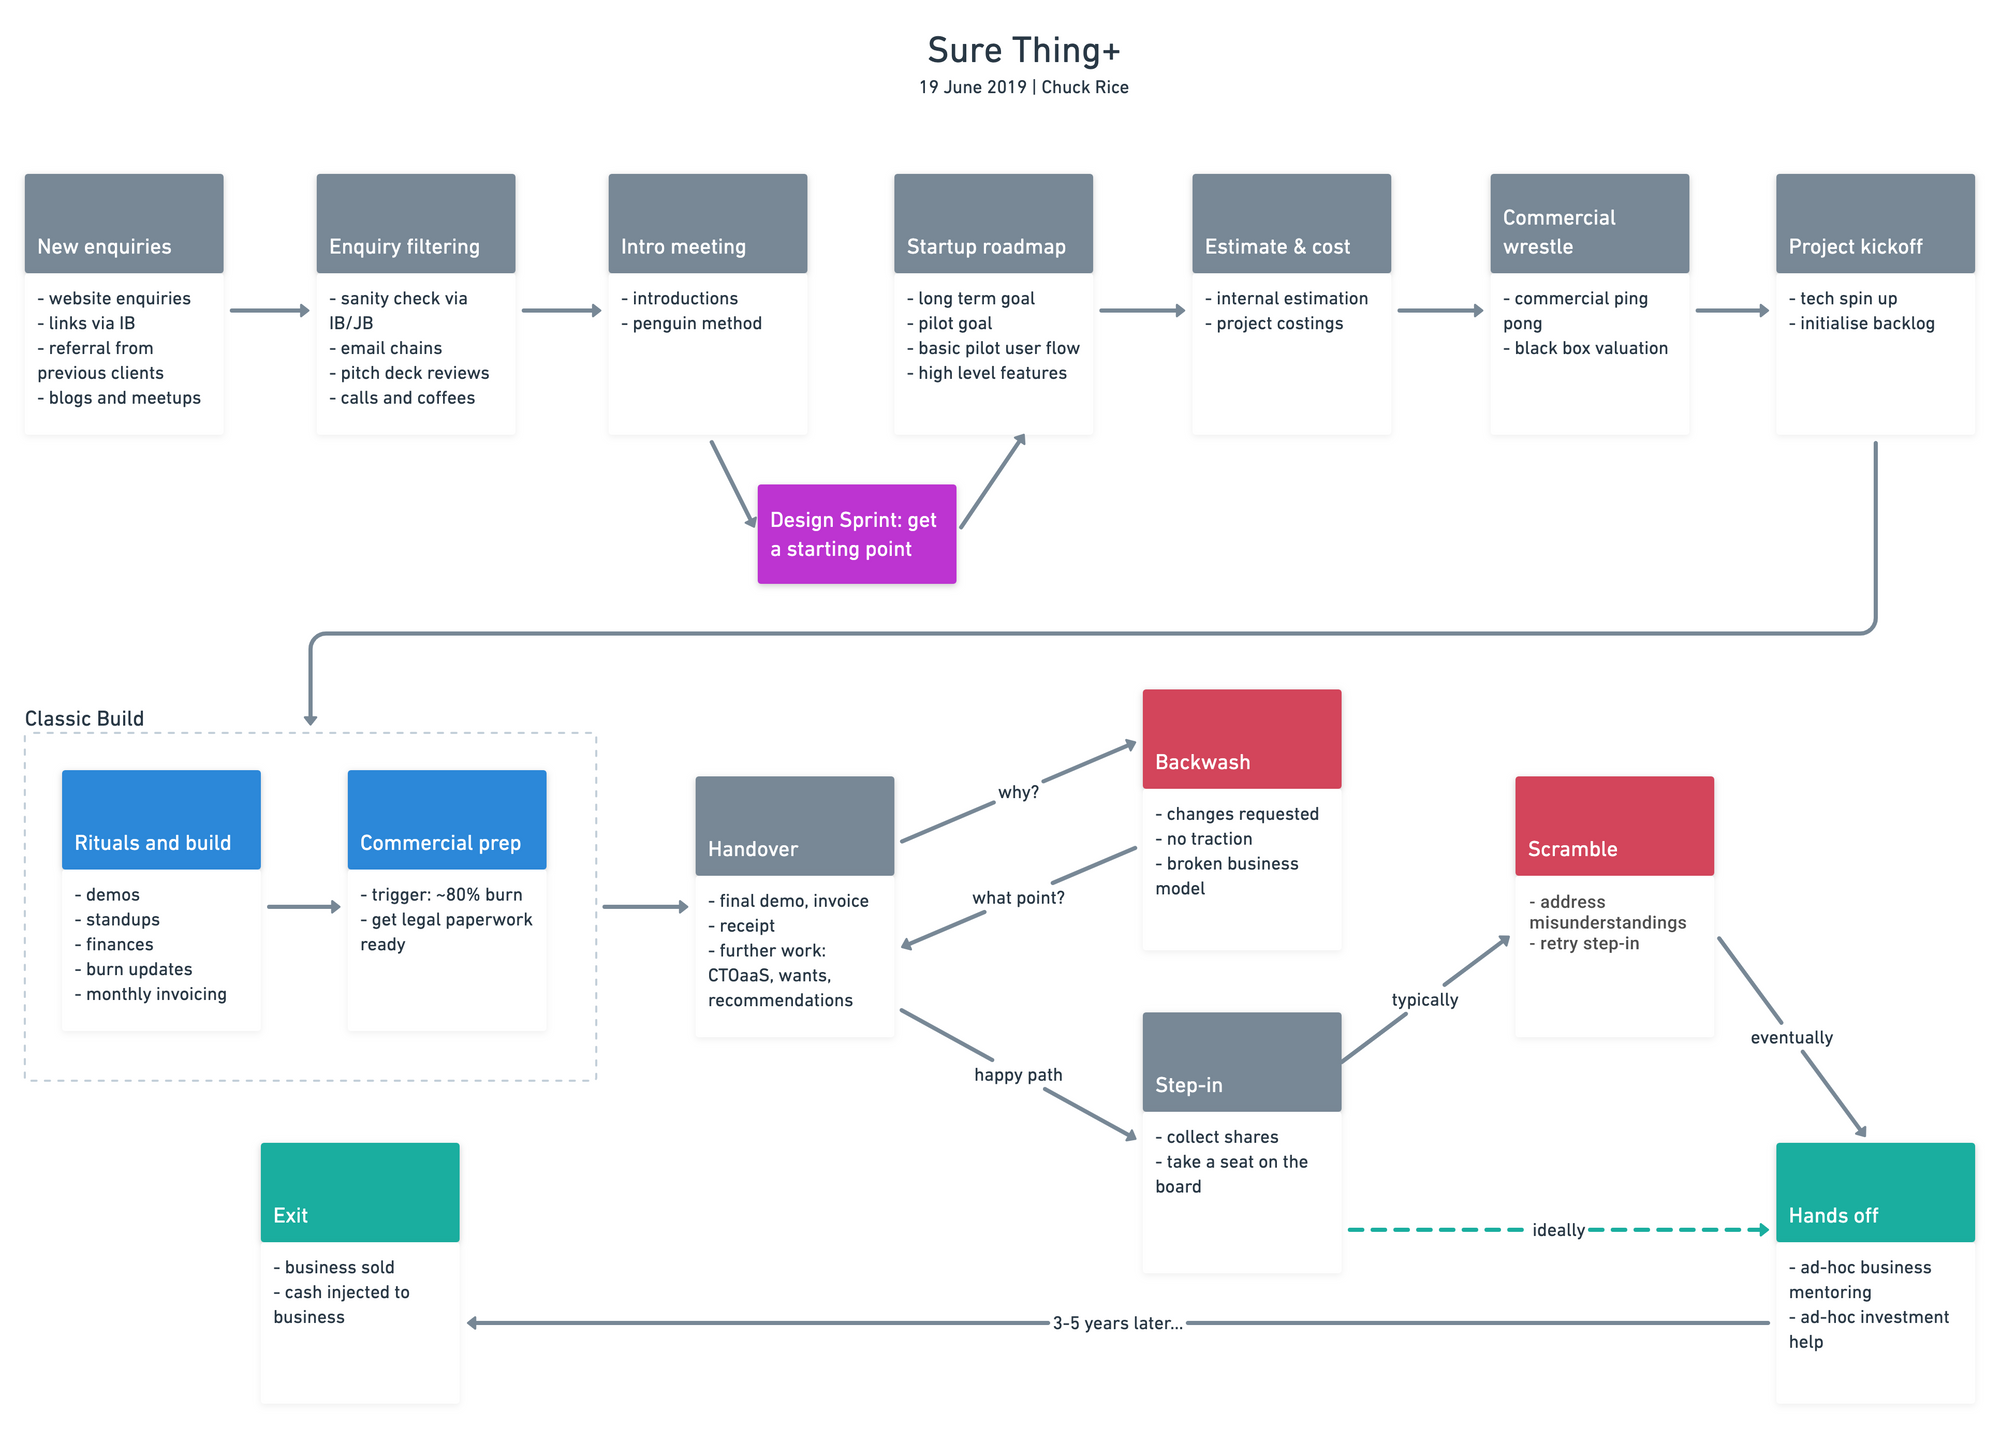 A Service Design approach to defining the TSF.tech process